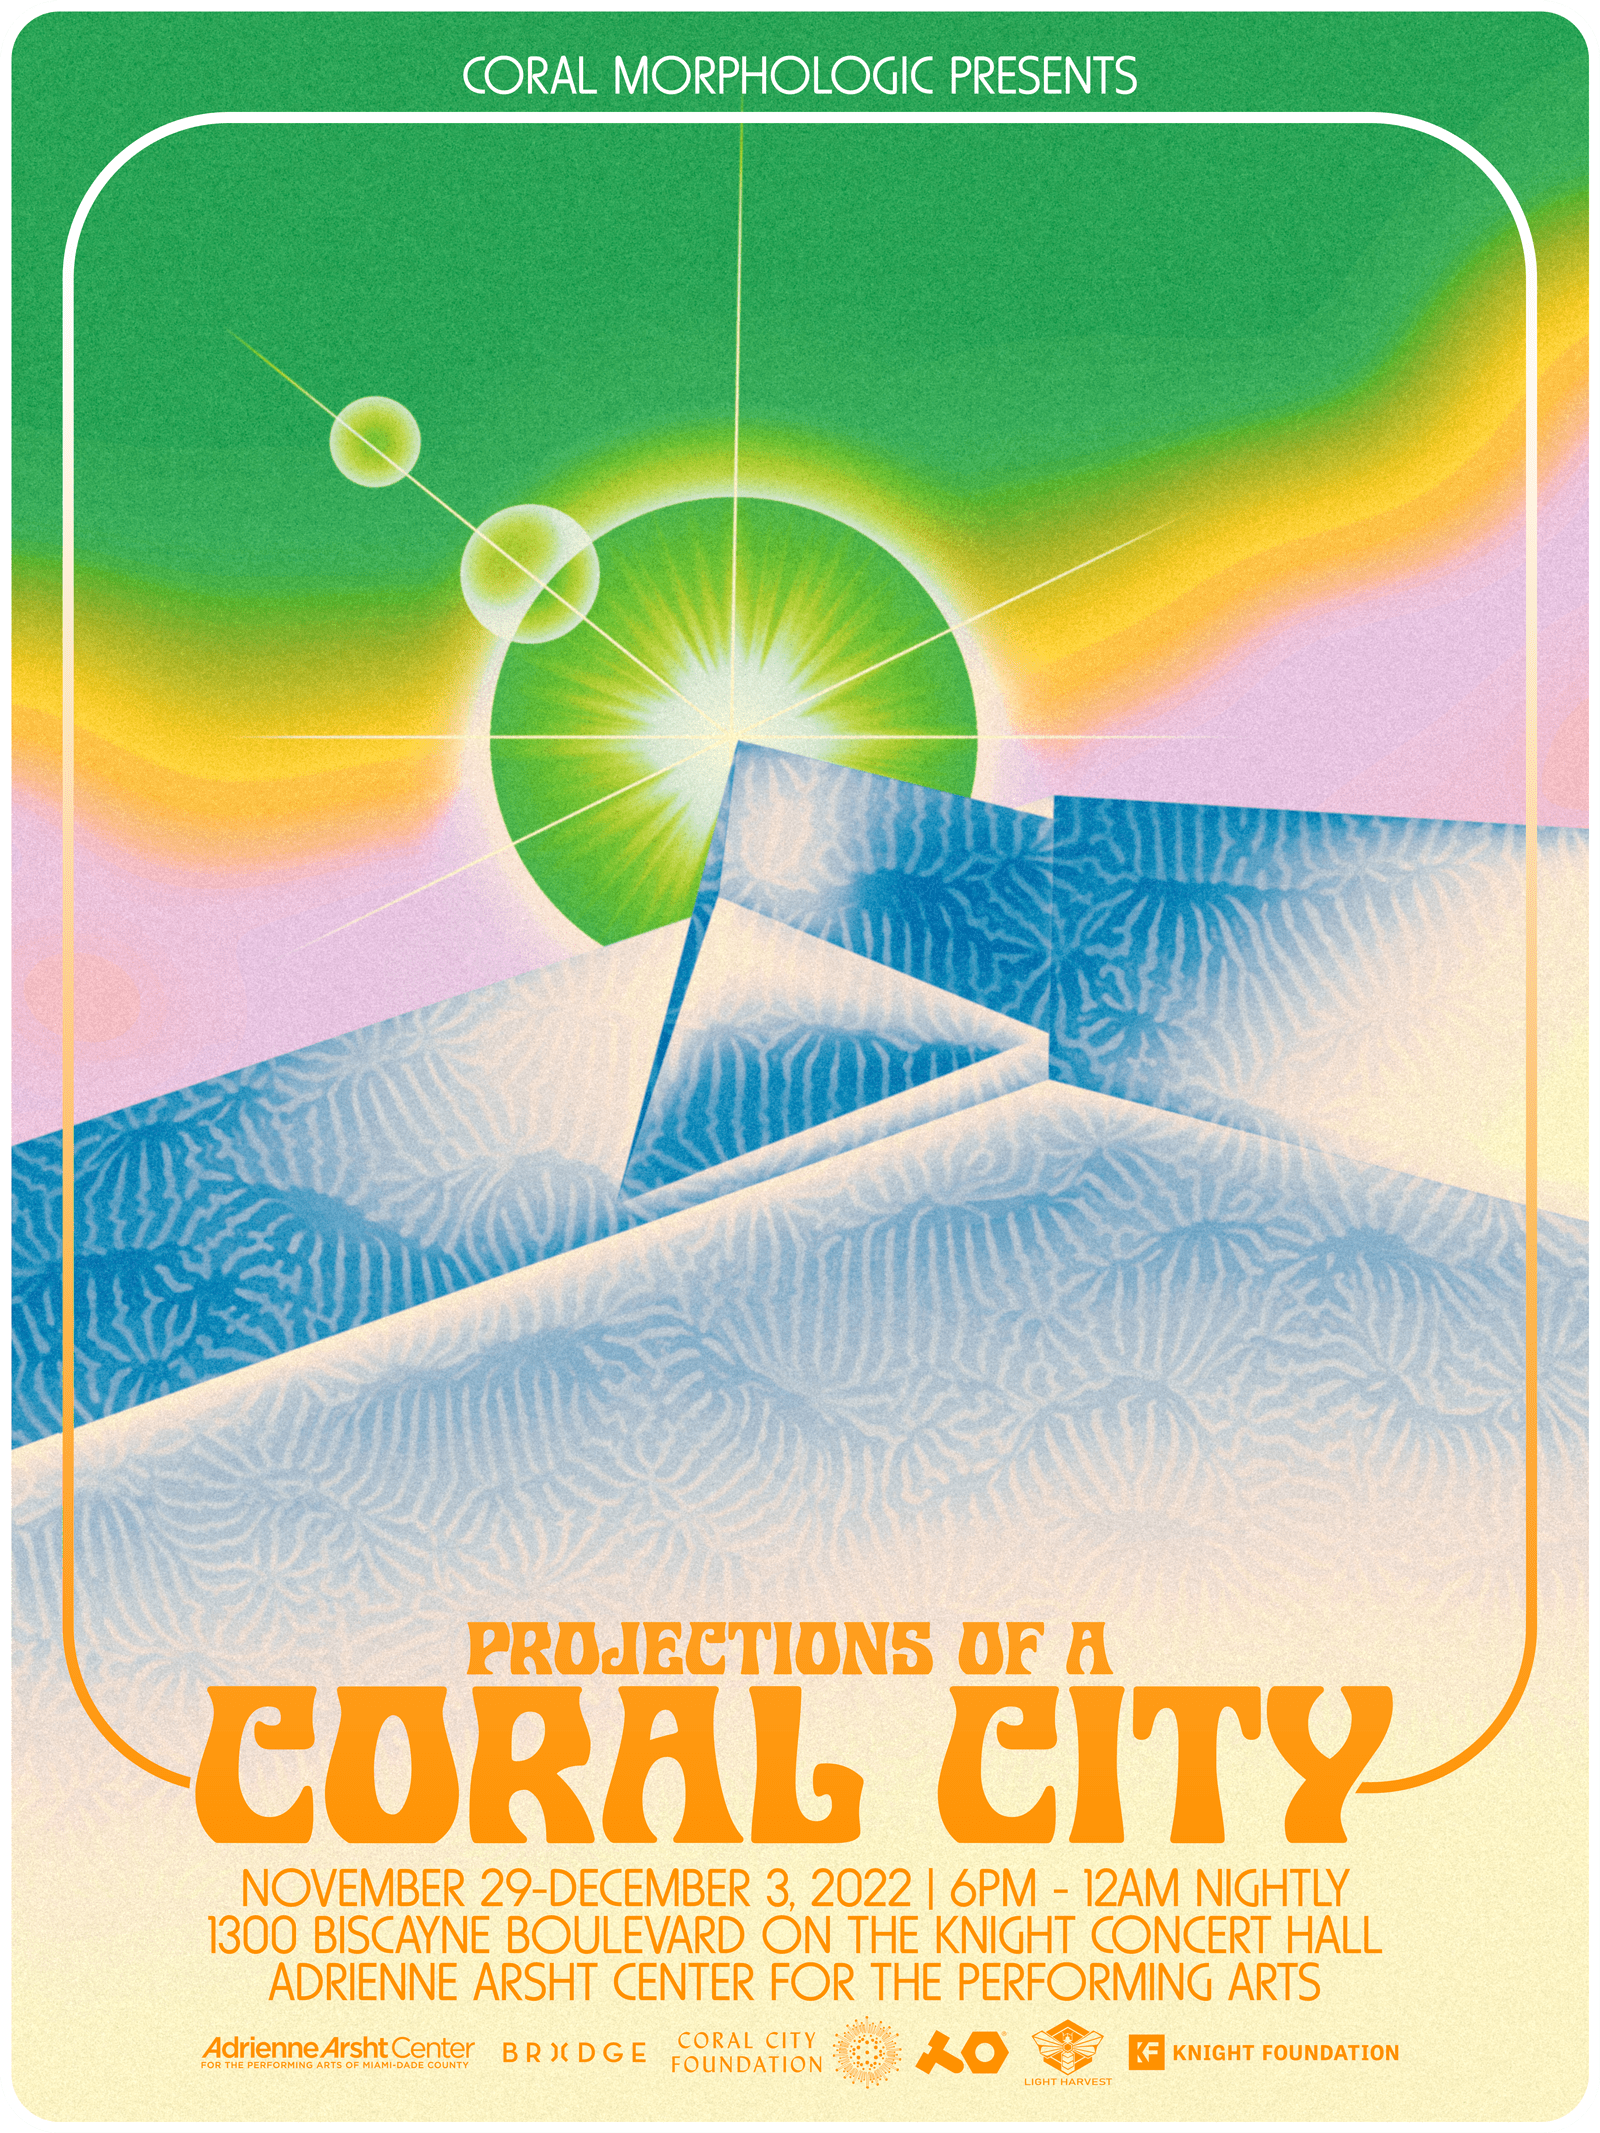 Official poster for Projections of a Coral City presented by Coral Morphologic